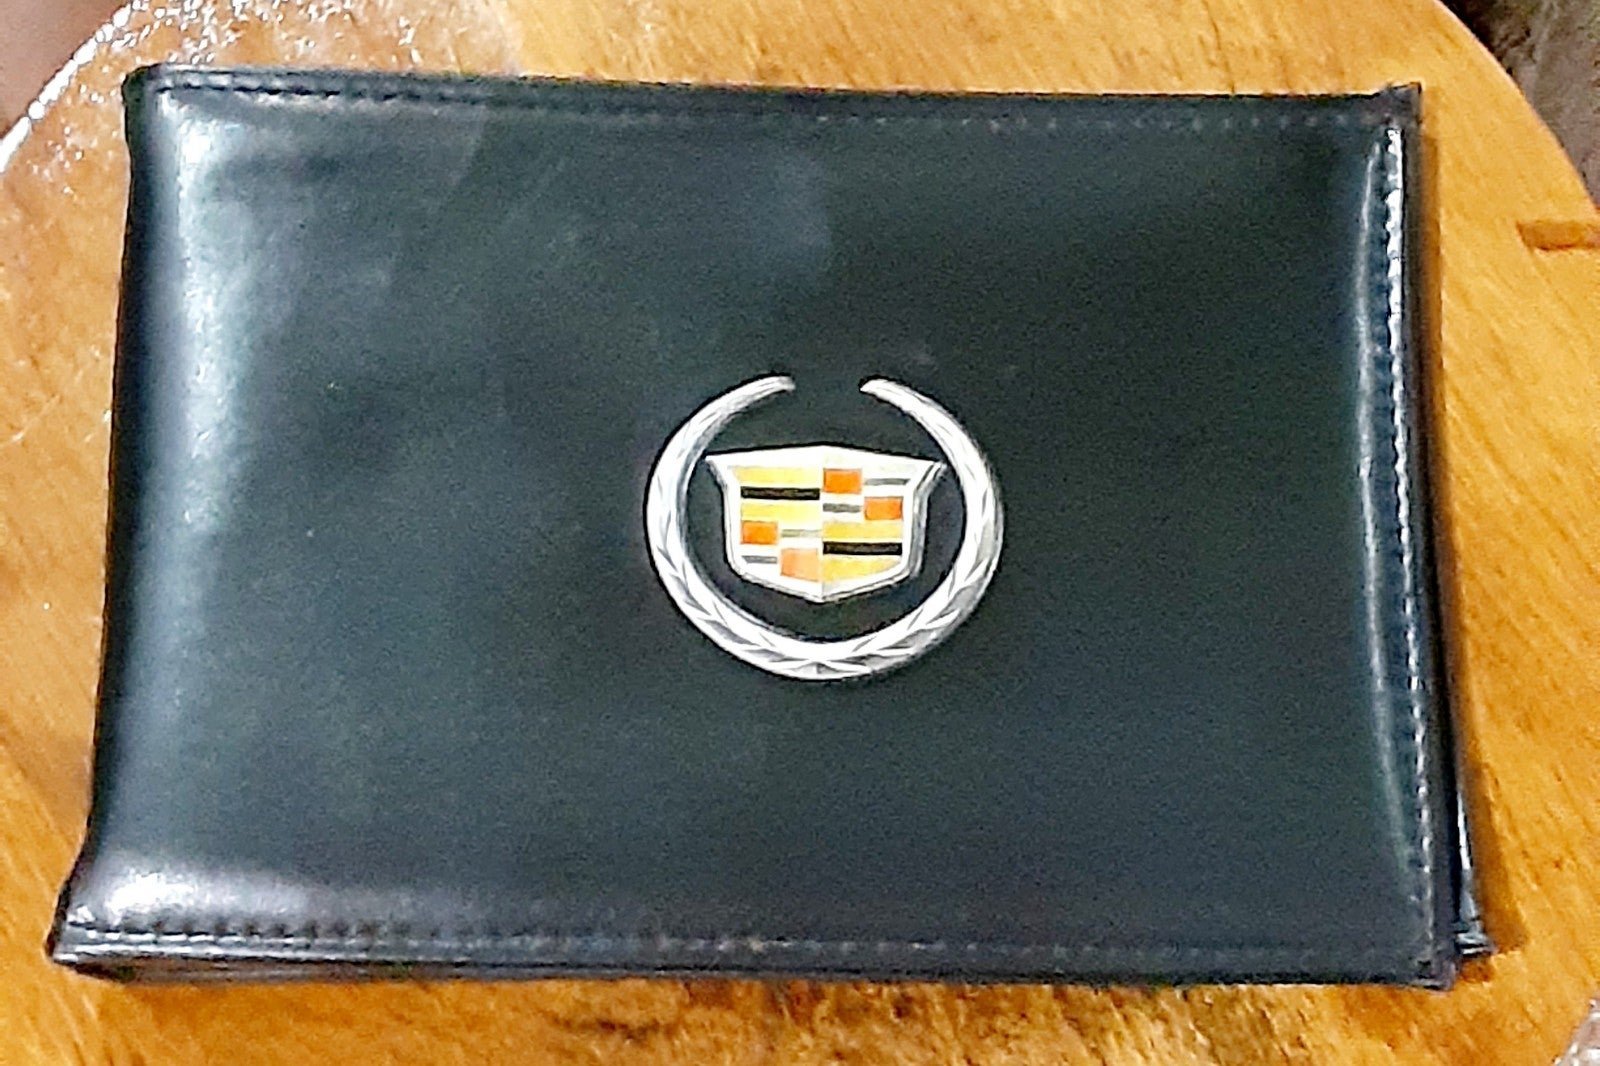 Cadillac OEM GM Black Leather Owners Manual Cover bdGCLuSxq